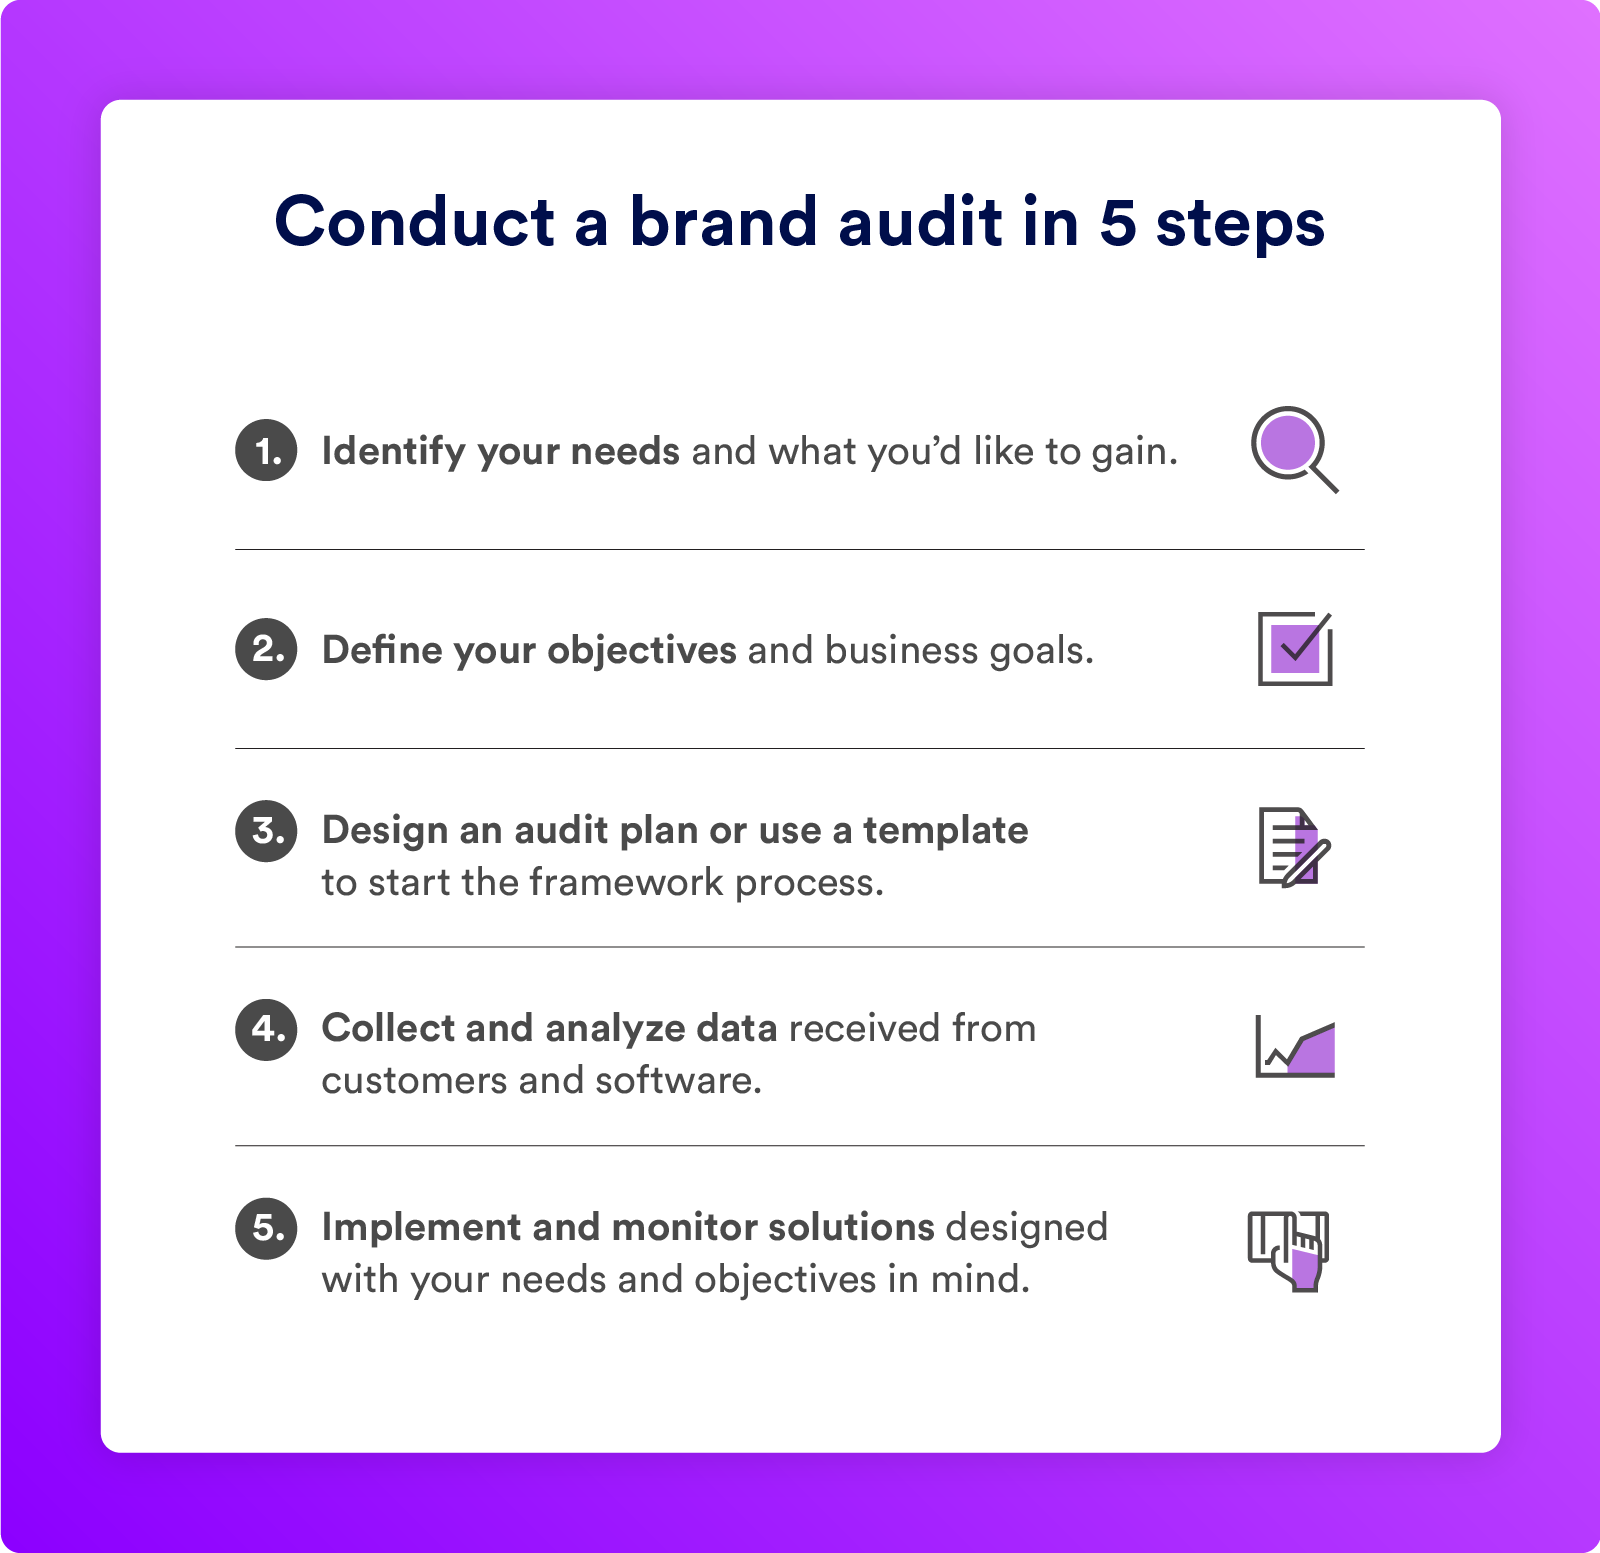 The five steps to conducting a brand audit